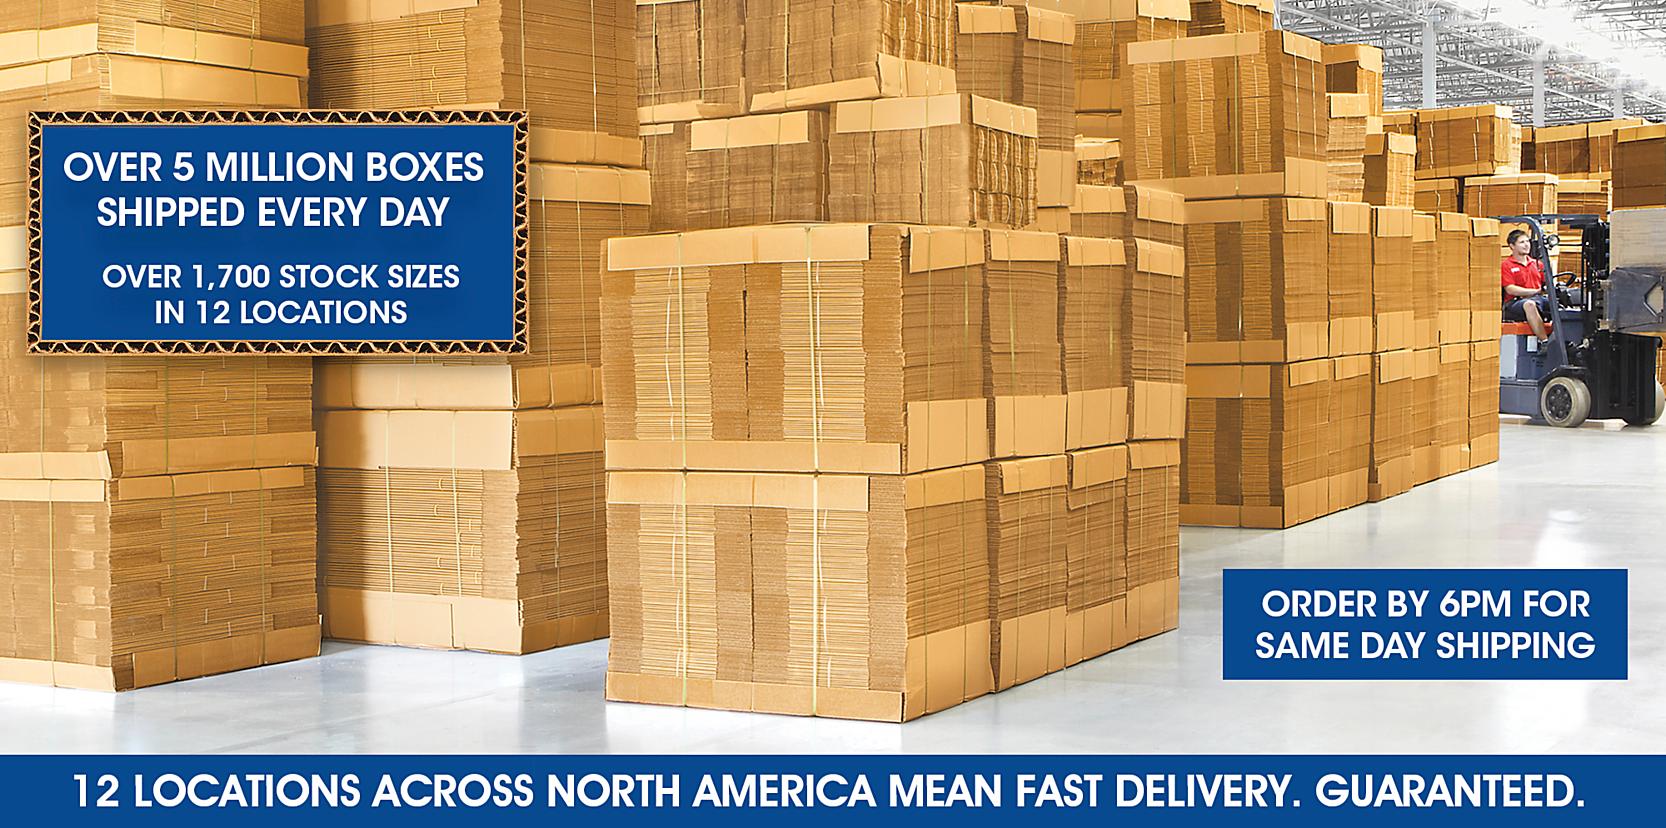 OVER 5 MILLION BOXES SHIPPED EVERY DAY - OVER 1,700 STOCK SIZES - 12 LOCATIONS ACROSS NORTH AMERICA MEAN FAST DELIVERY. GUARANTEED.